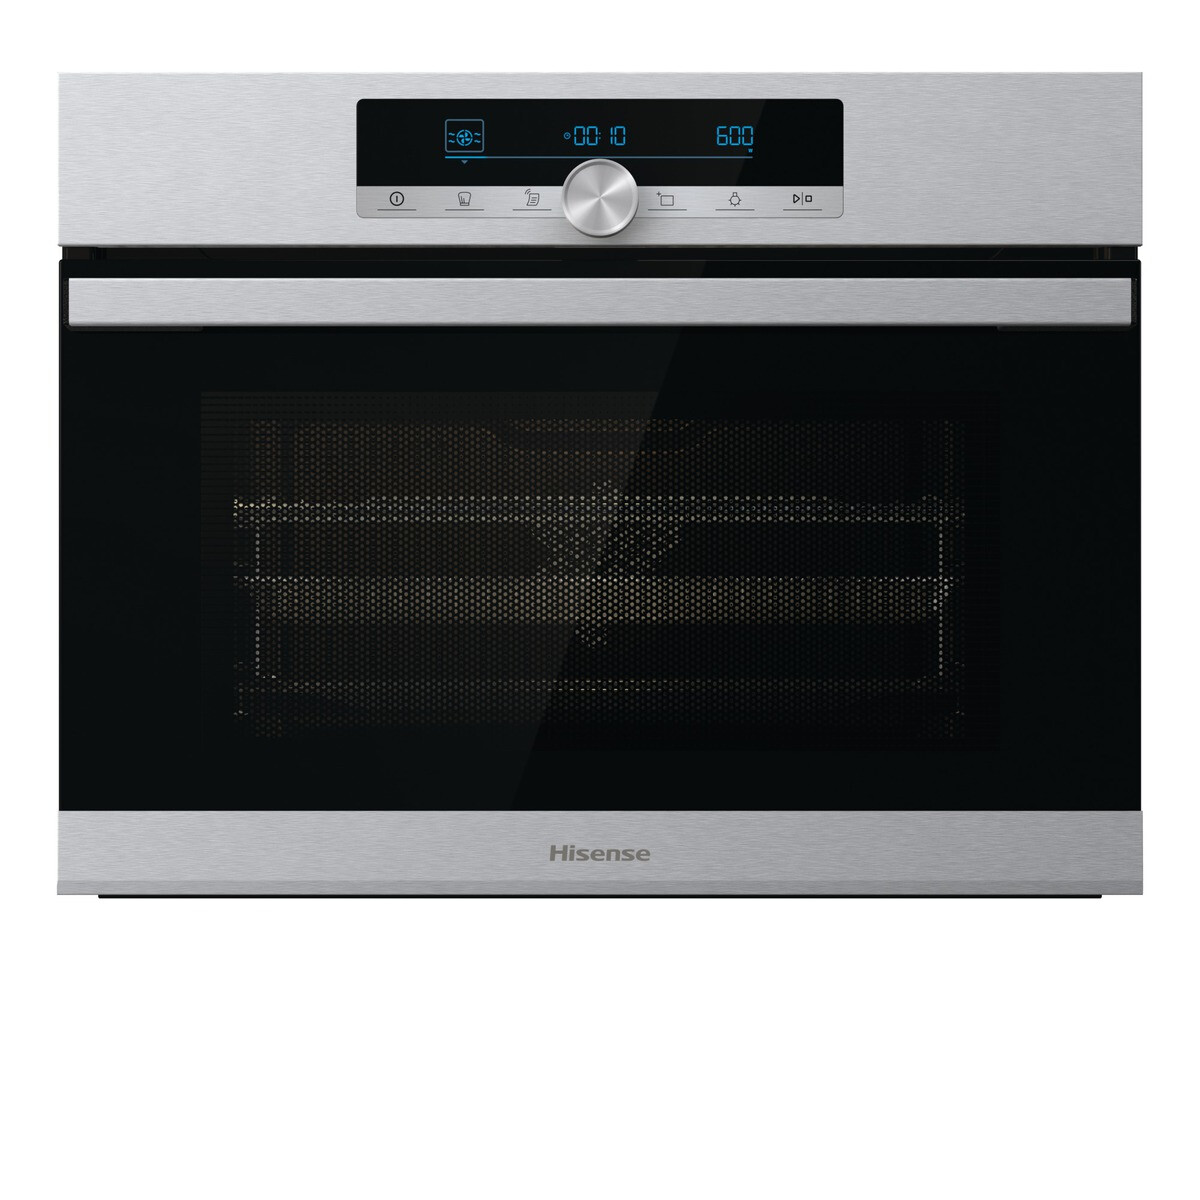 Hisense BIM44321AX Built In Compact Electric Single Oven with Microwave Function – Stainless Steel #363709